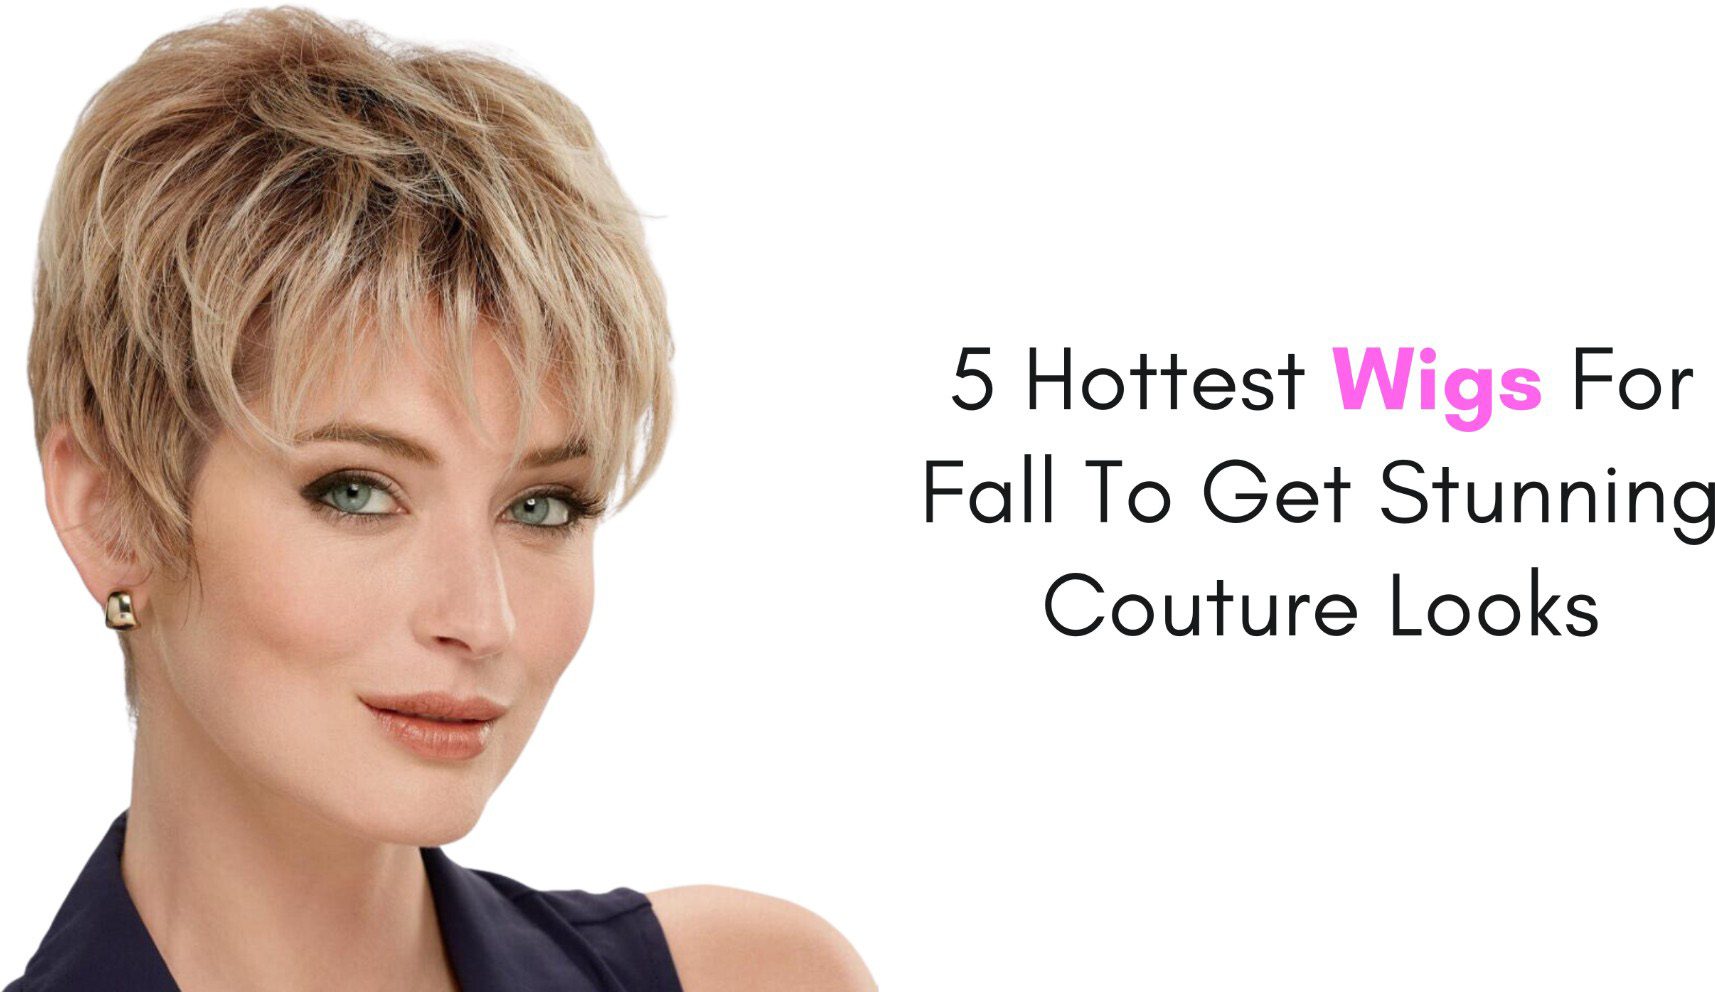 5 Hottest Wigs For Fall To Get Stunning Couture Looks